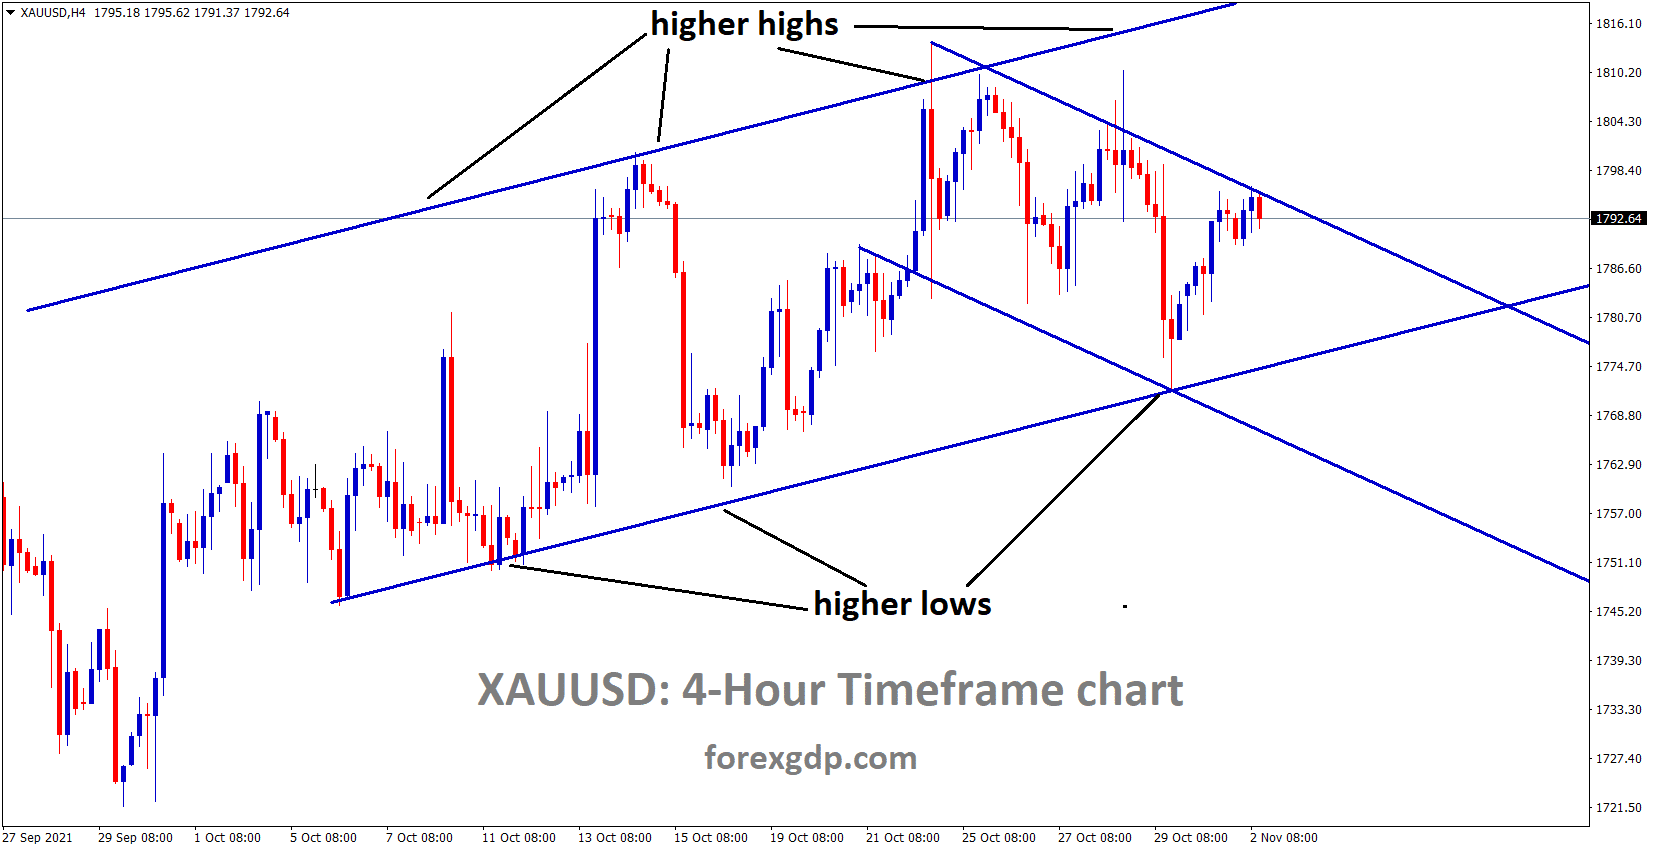 XAUUSD Gold prices are moving in an Ascending channel and inside the major channel